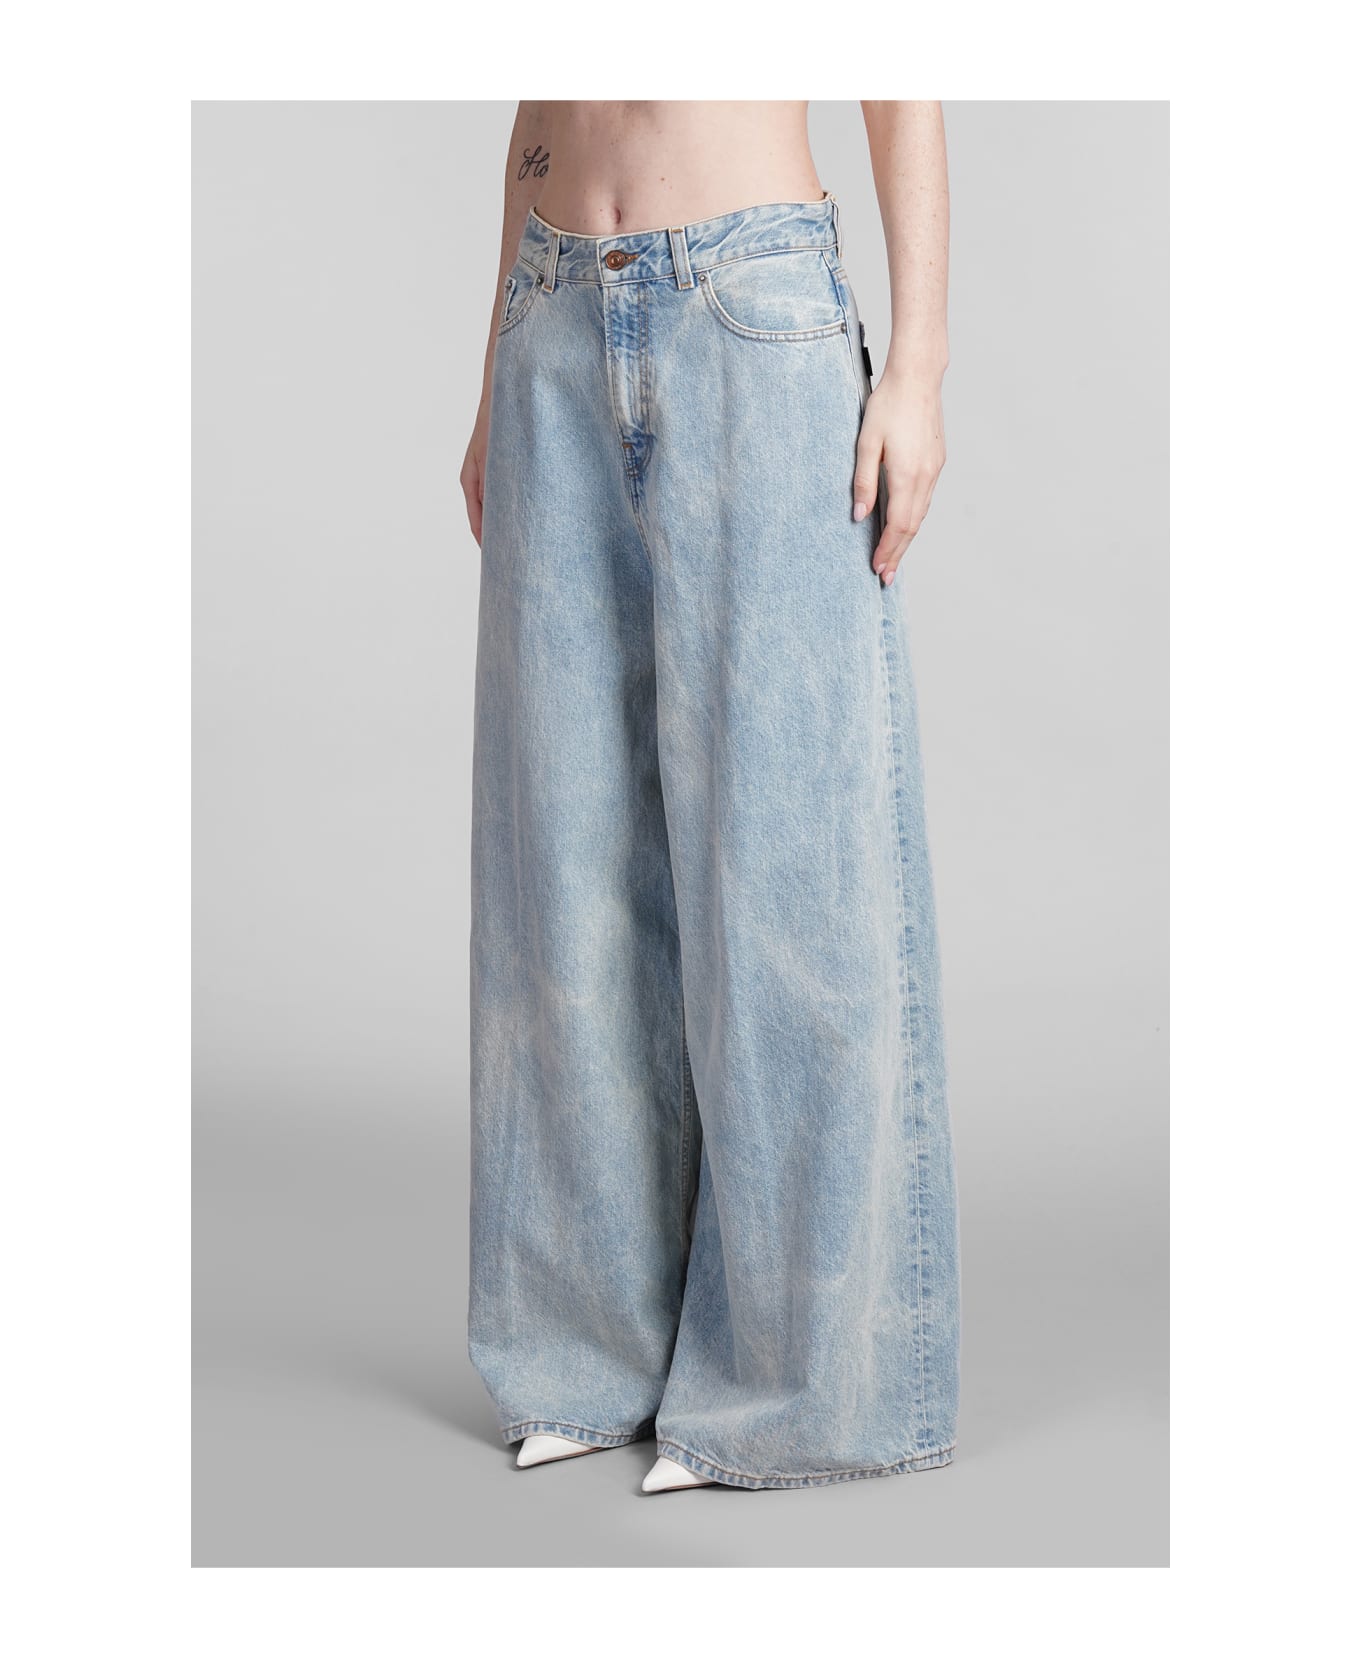 Haikure Big Bethany Jeans In Blue Cotton - blue